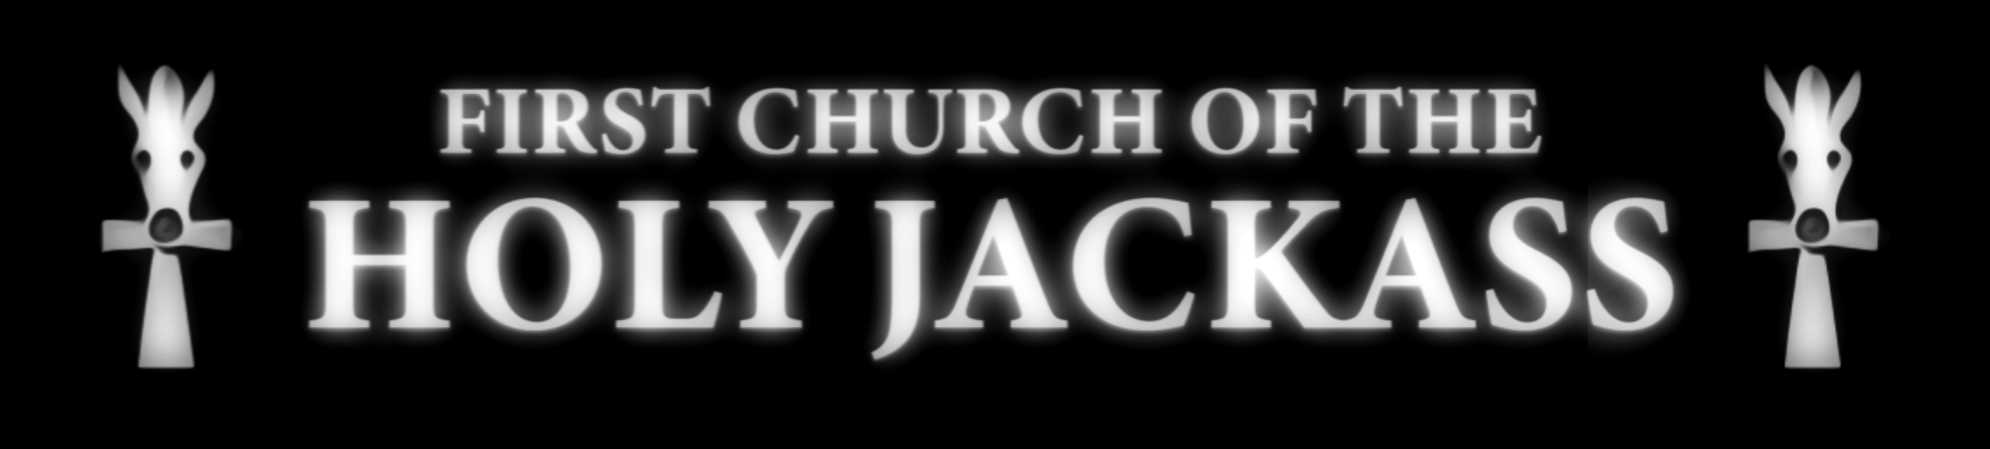 First Church of the Holy Jackass